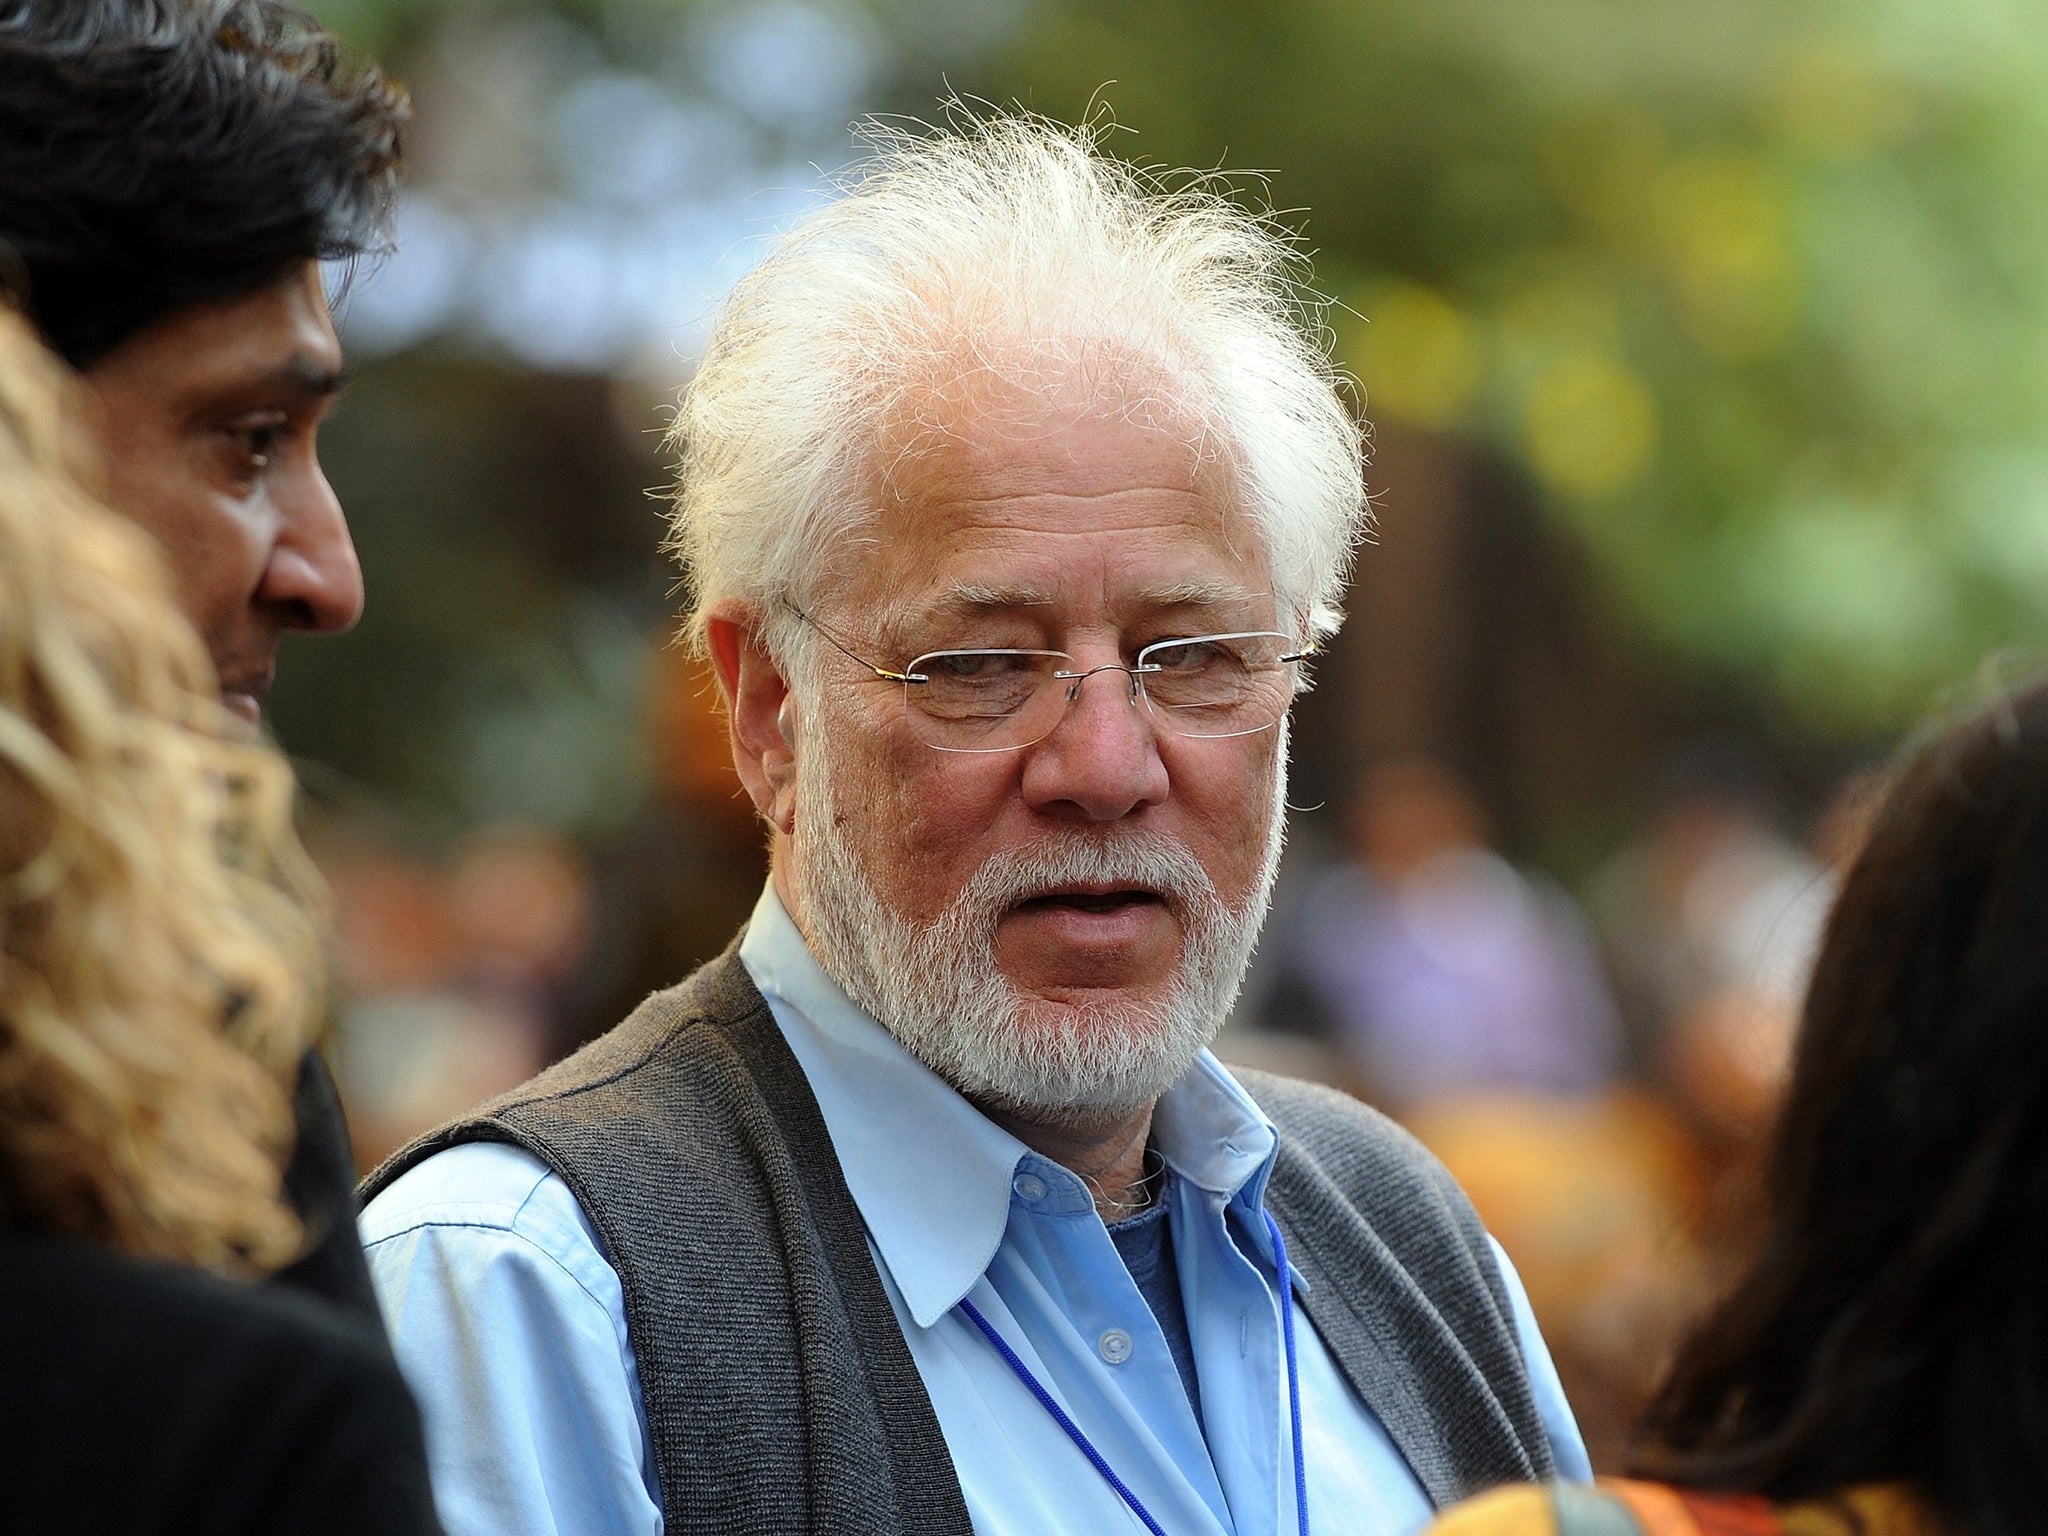 'The English Patient' author Michael Ondaatje is among the authors withdrawing from the PEN American Center gala